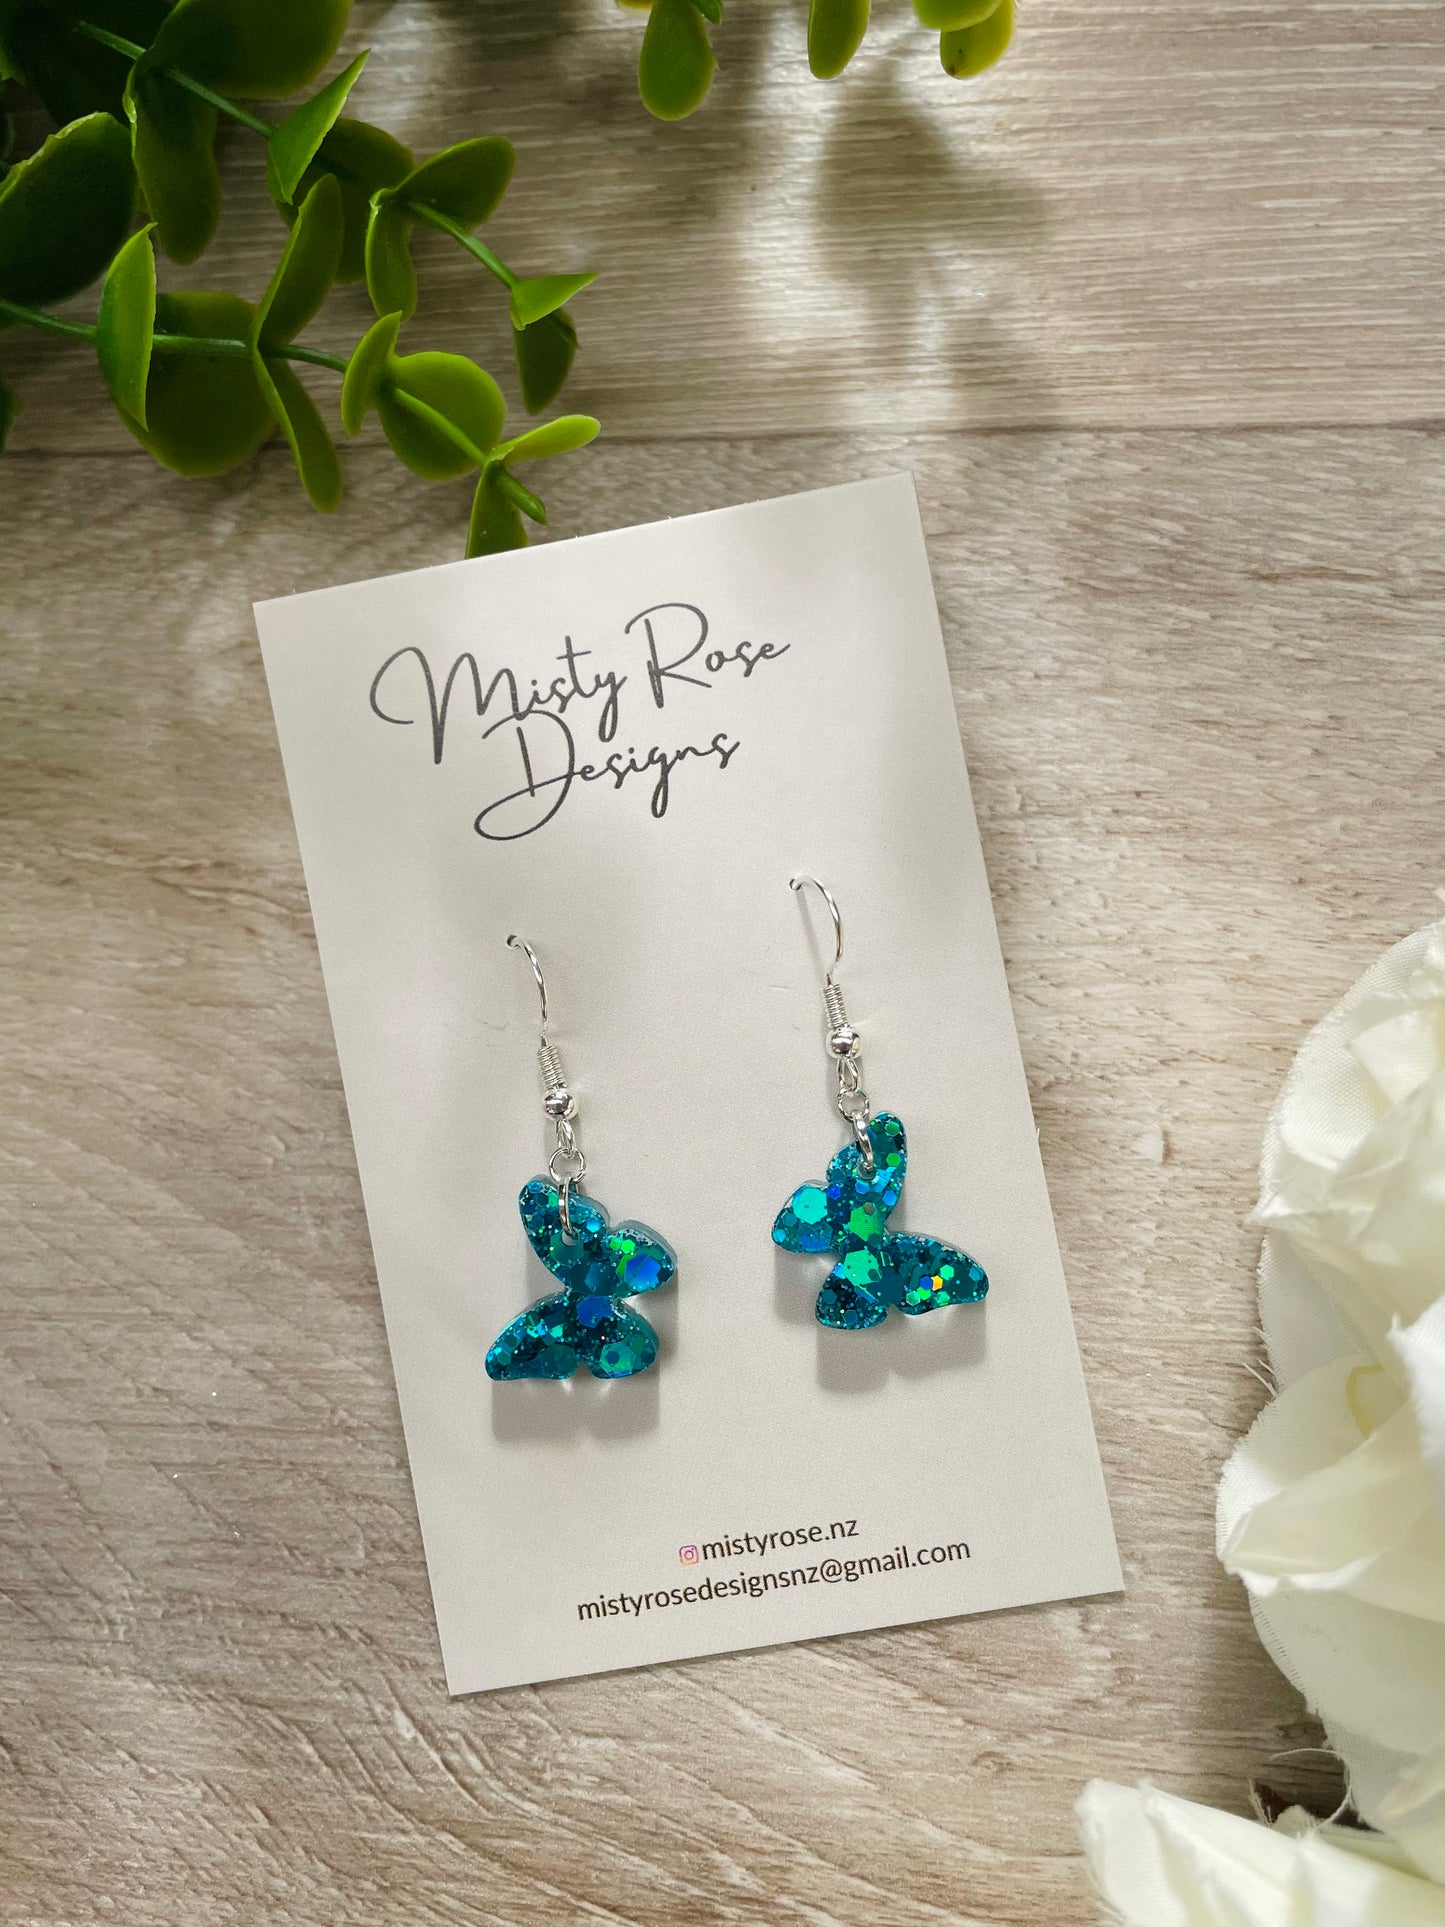 Mini Butterfly Earrings 🦋🦋  These are the most beautiful bright blue tone.  These cute & glittery lightweight earrings are sure to add some sparkle to any look!  Approx 1.7cm x 1.4cm